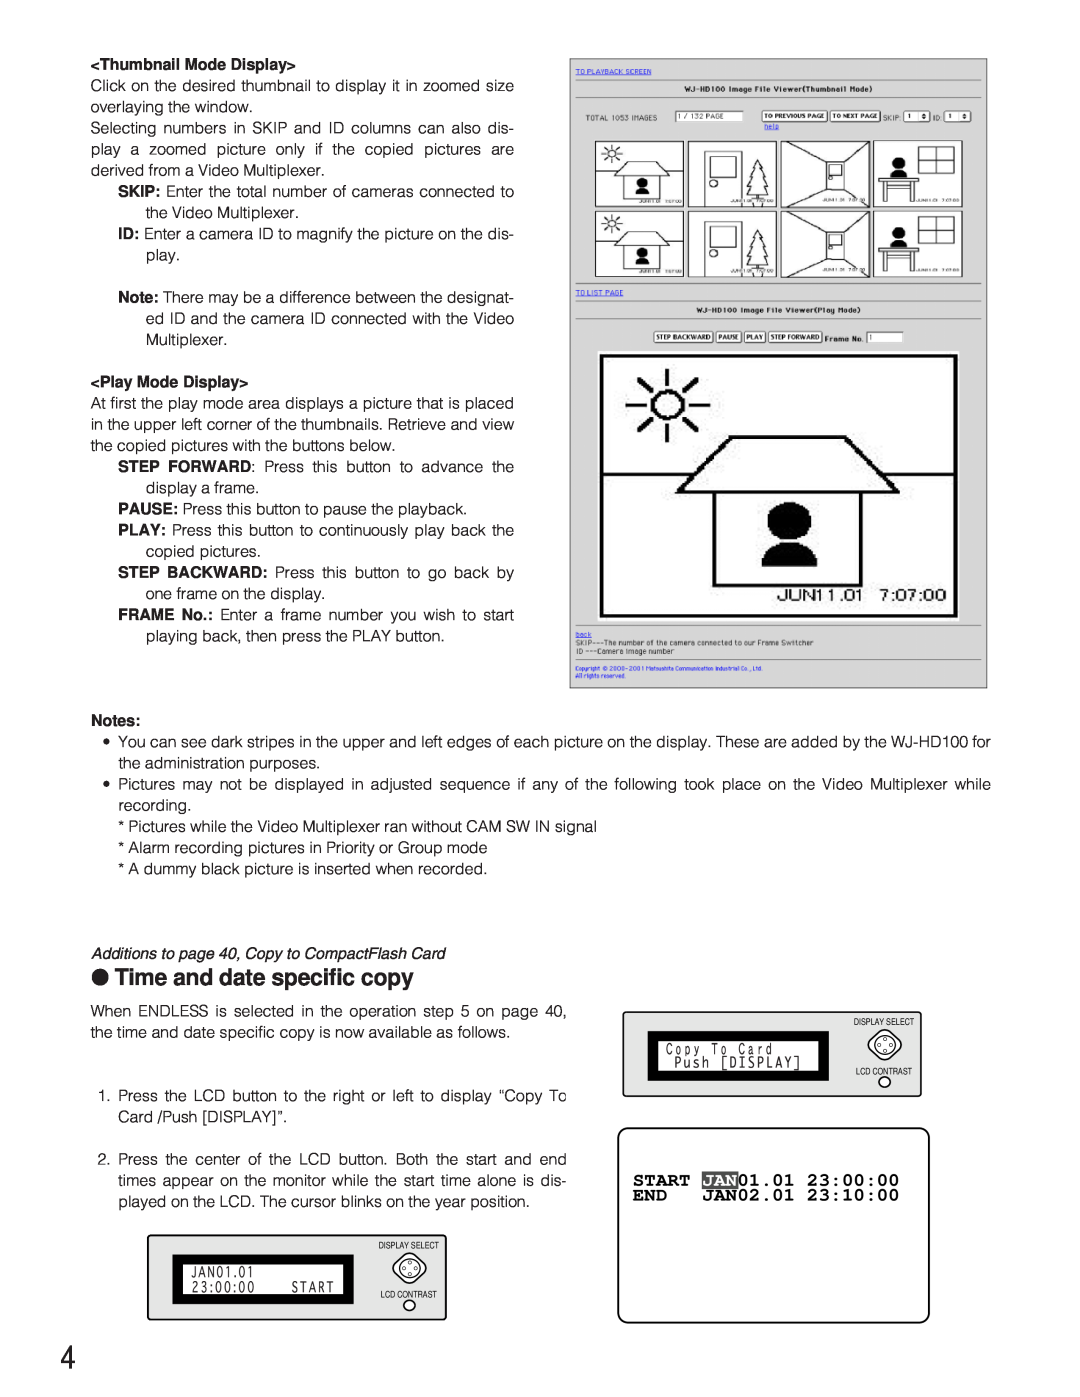 Panasonic WJ-HD100 operating instructions Time and date specific copy, Thumbnail Mode Display, Play Mode Display 